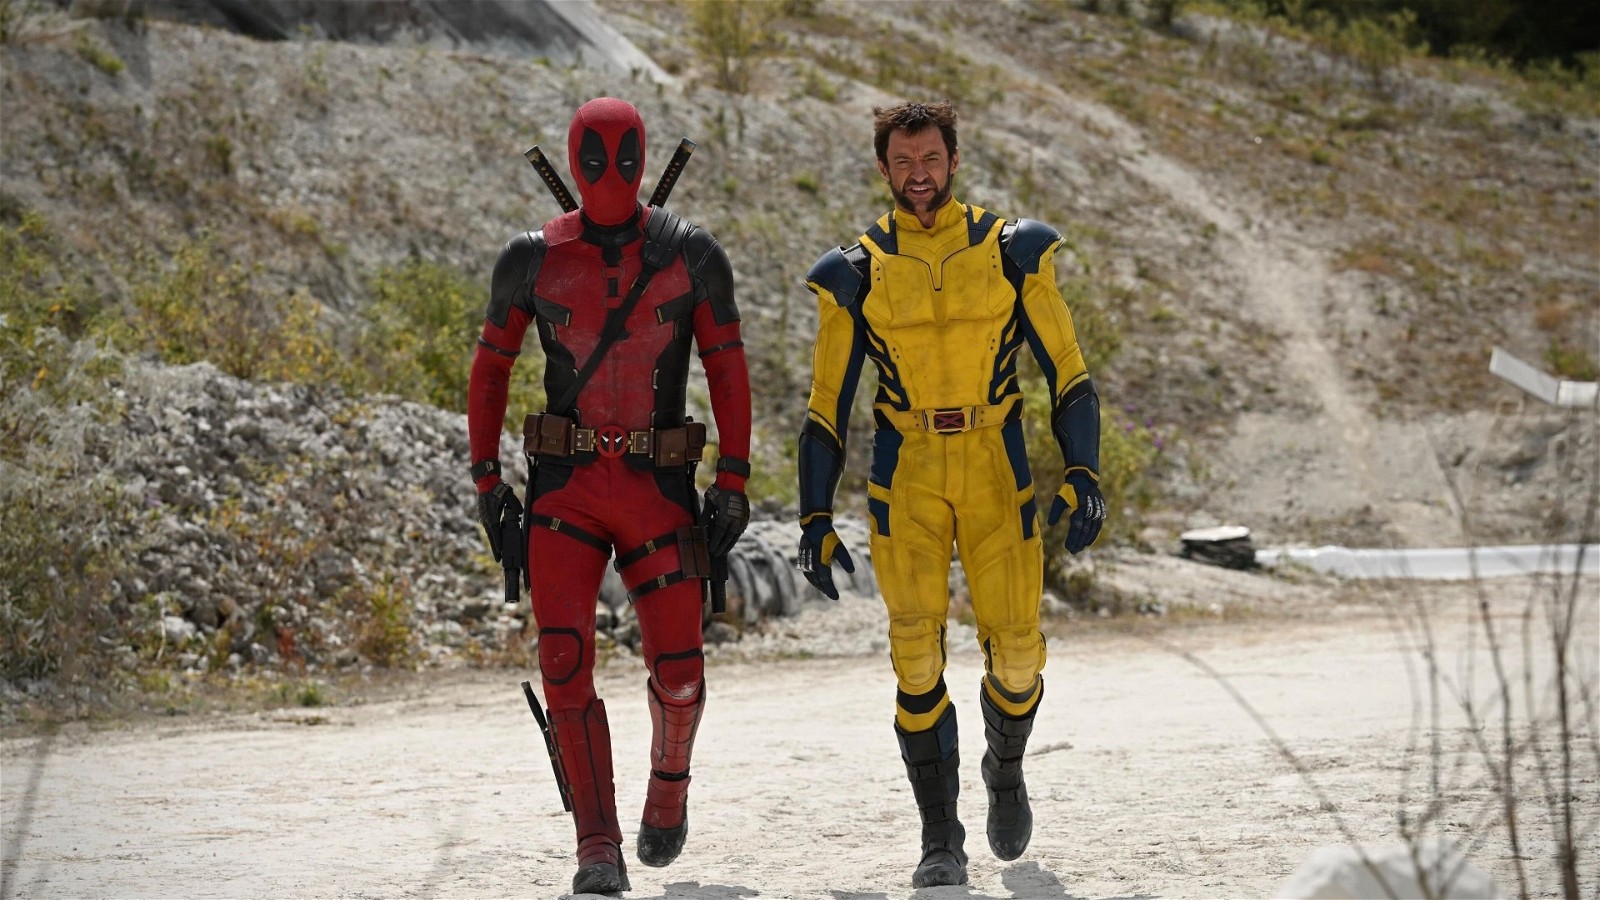 A behind-the-scenes still from Deadpool 3